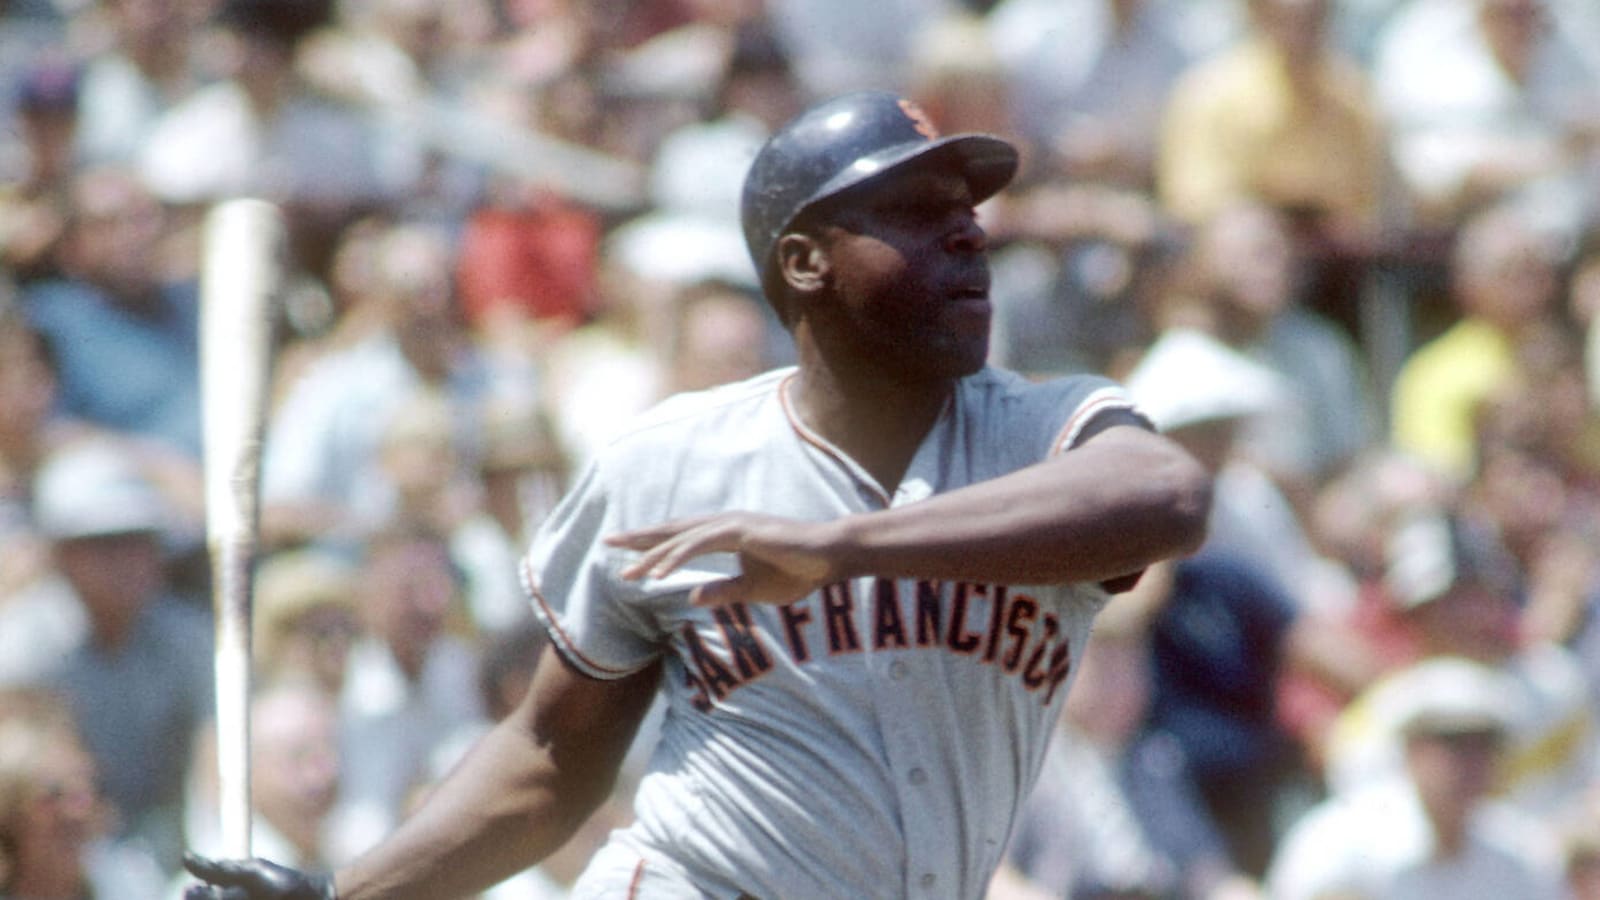 Giants great had historic MLB debut on this date